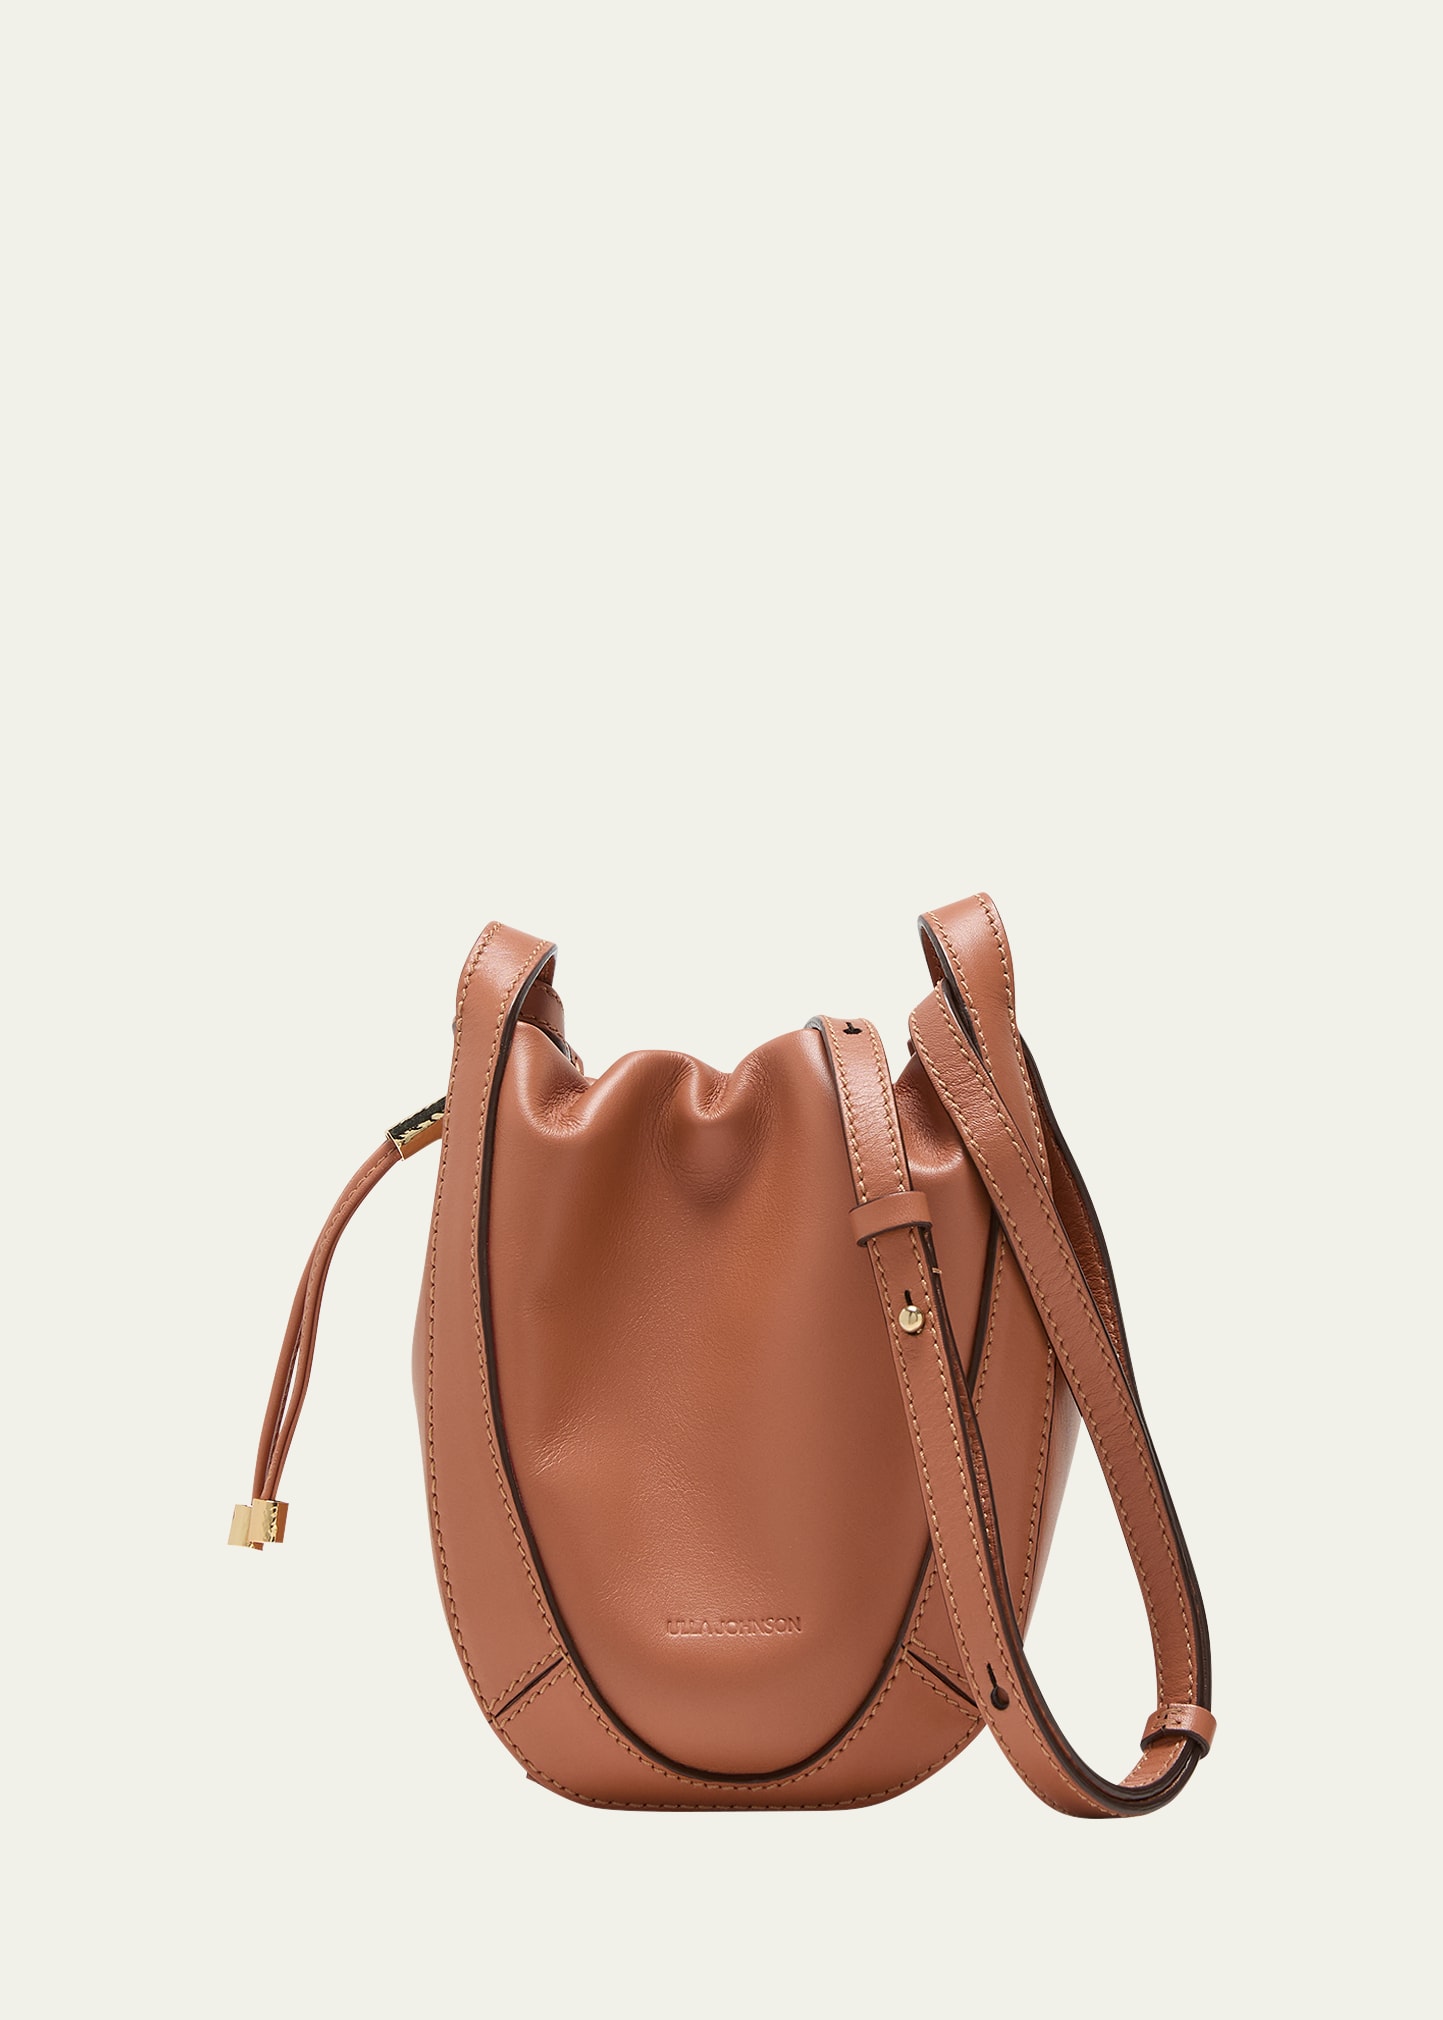 Ulla Johnson Lee Pouch Drawstring Leather Bucket Bag In Pecan Brown